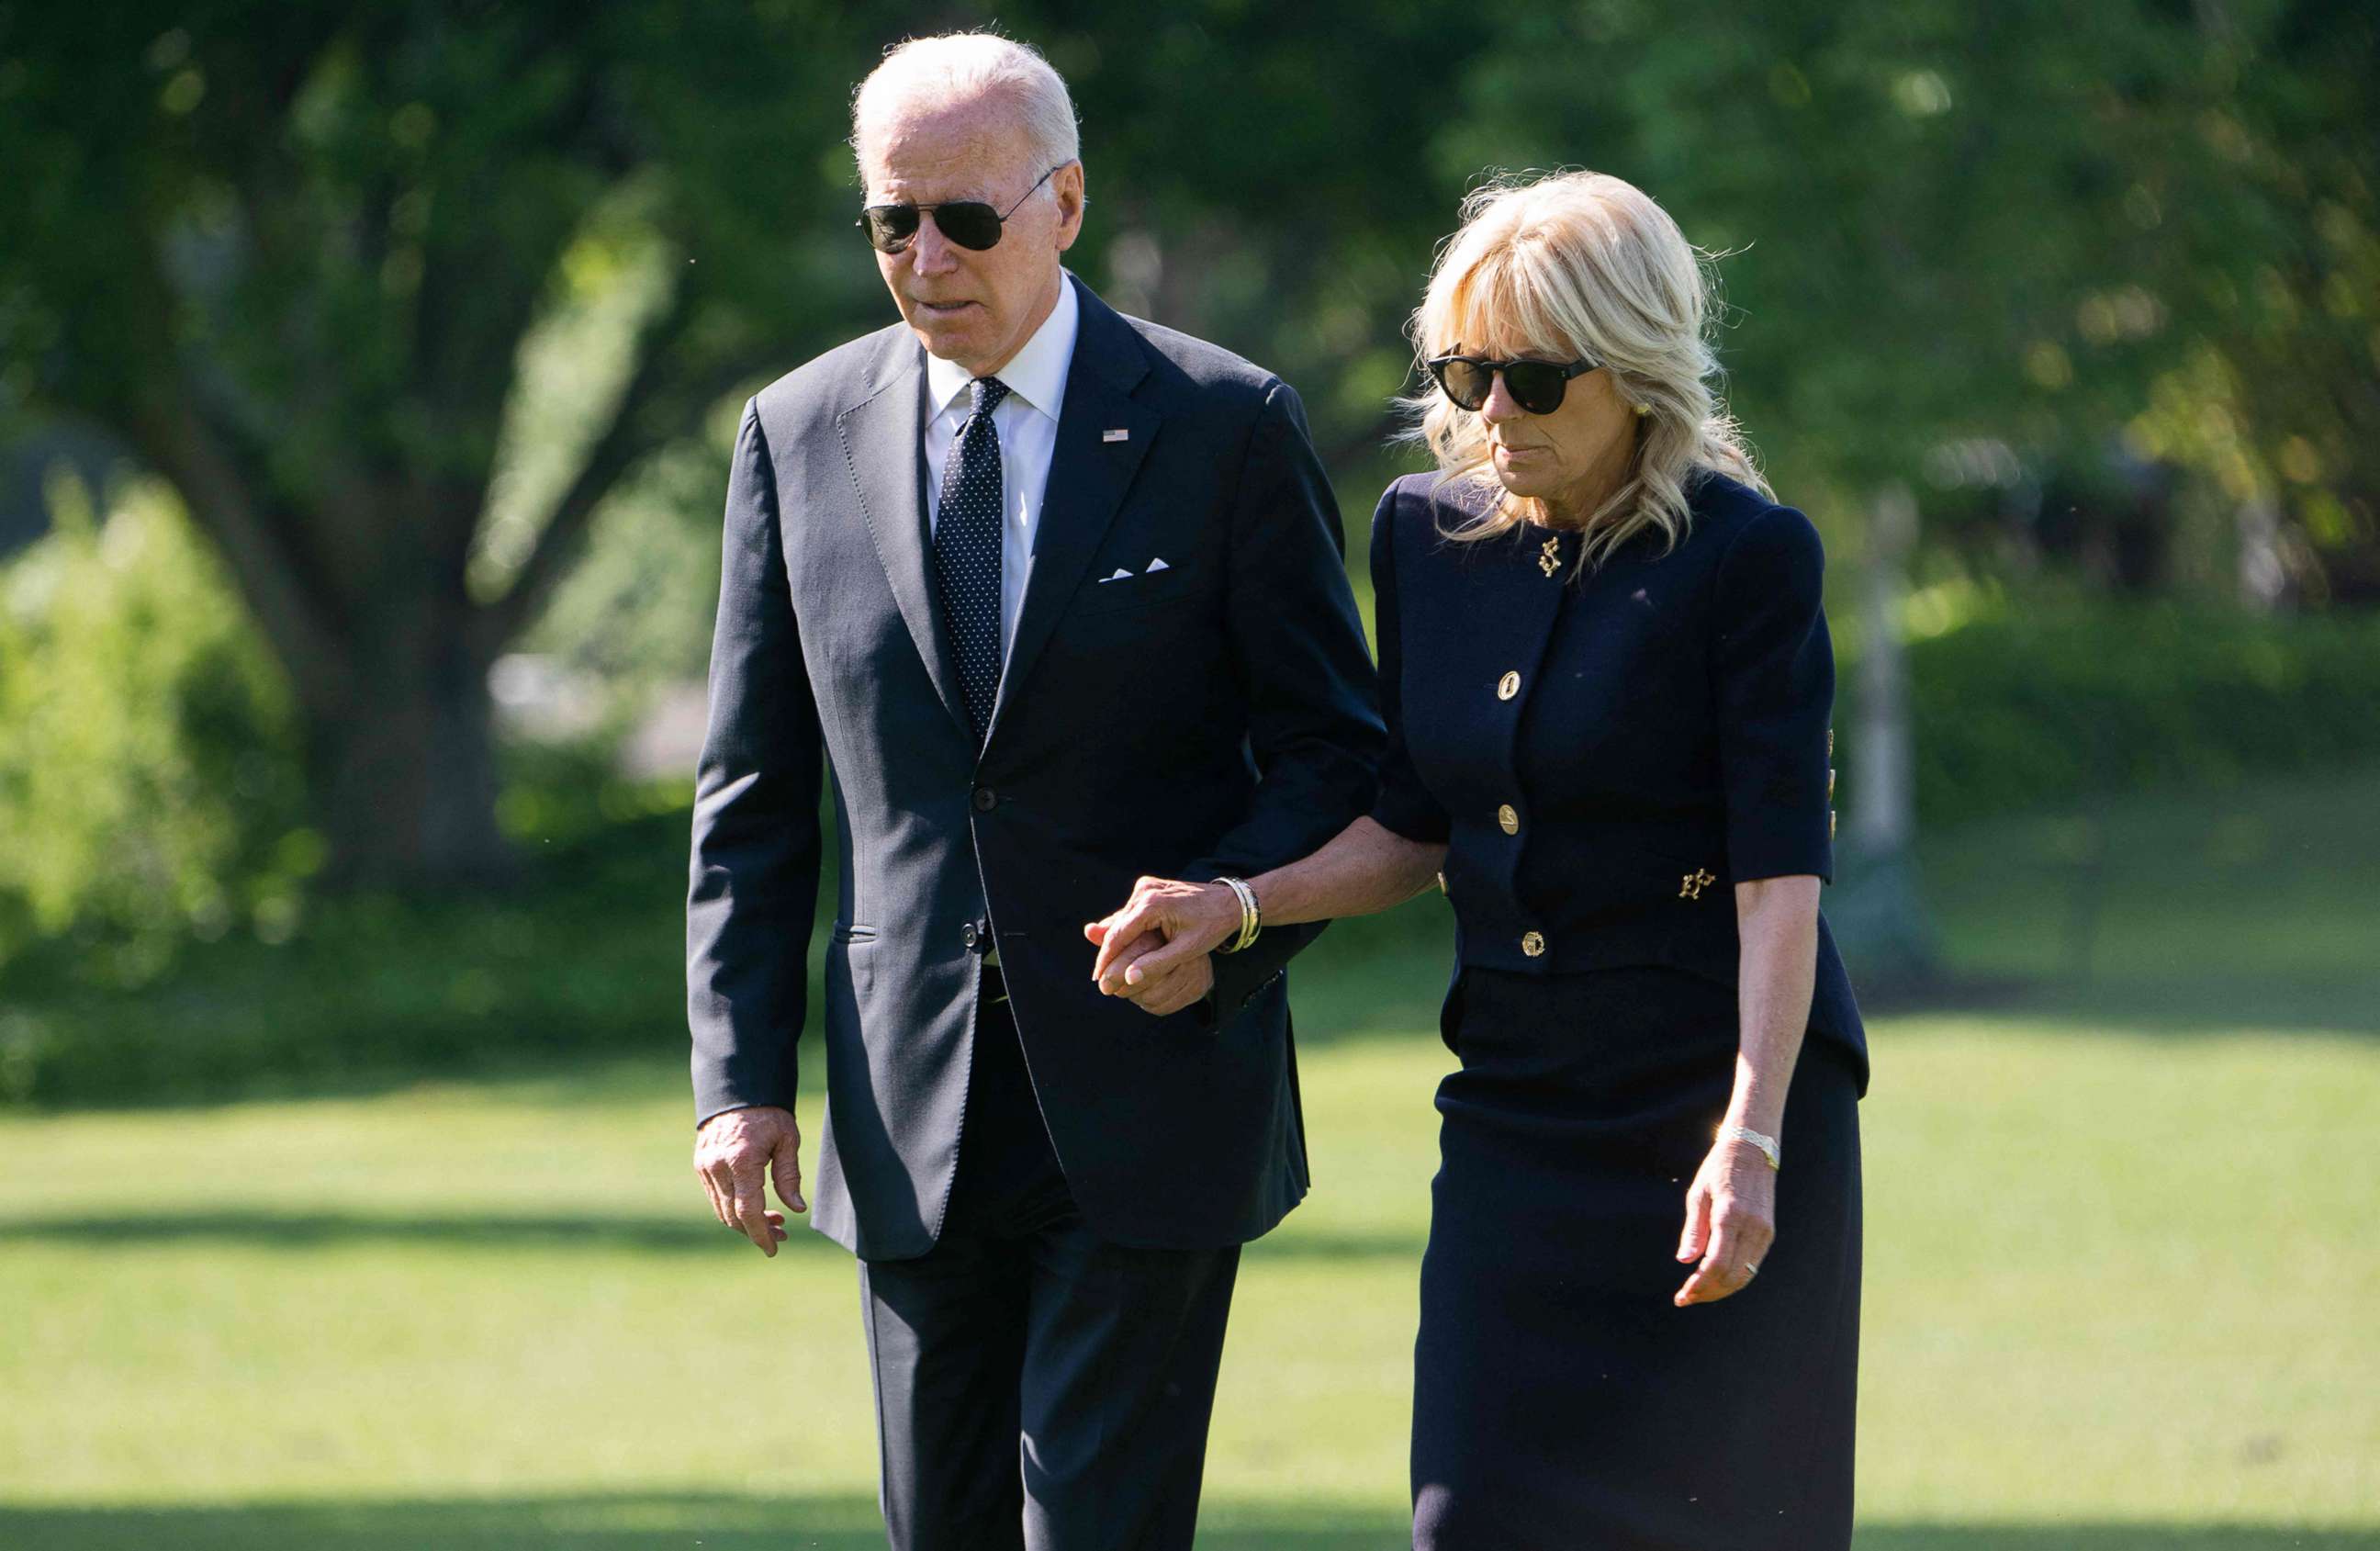 PHOTO: President Joe Biden and first lady Jill Biden walk on the South Lawn of the White House in Washington, D.C, May 30, 2022.